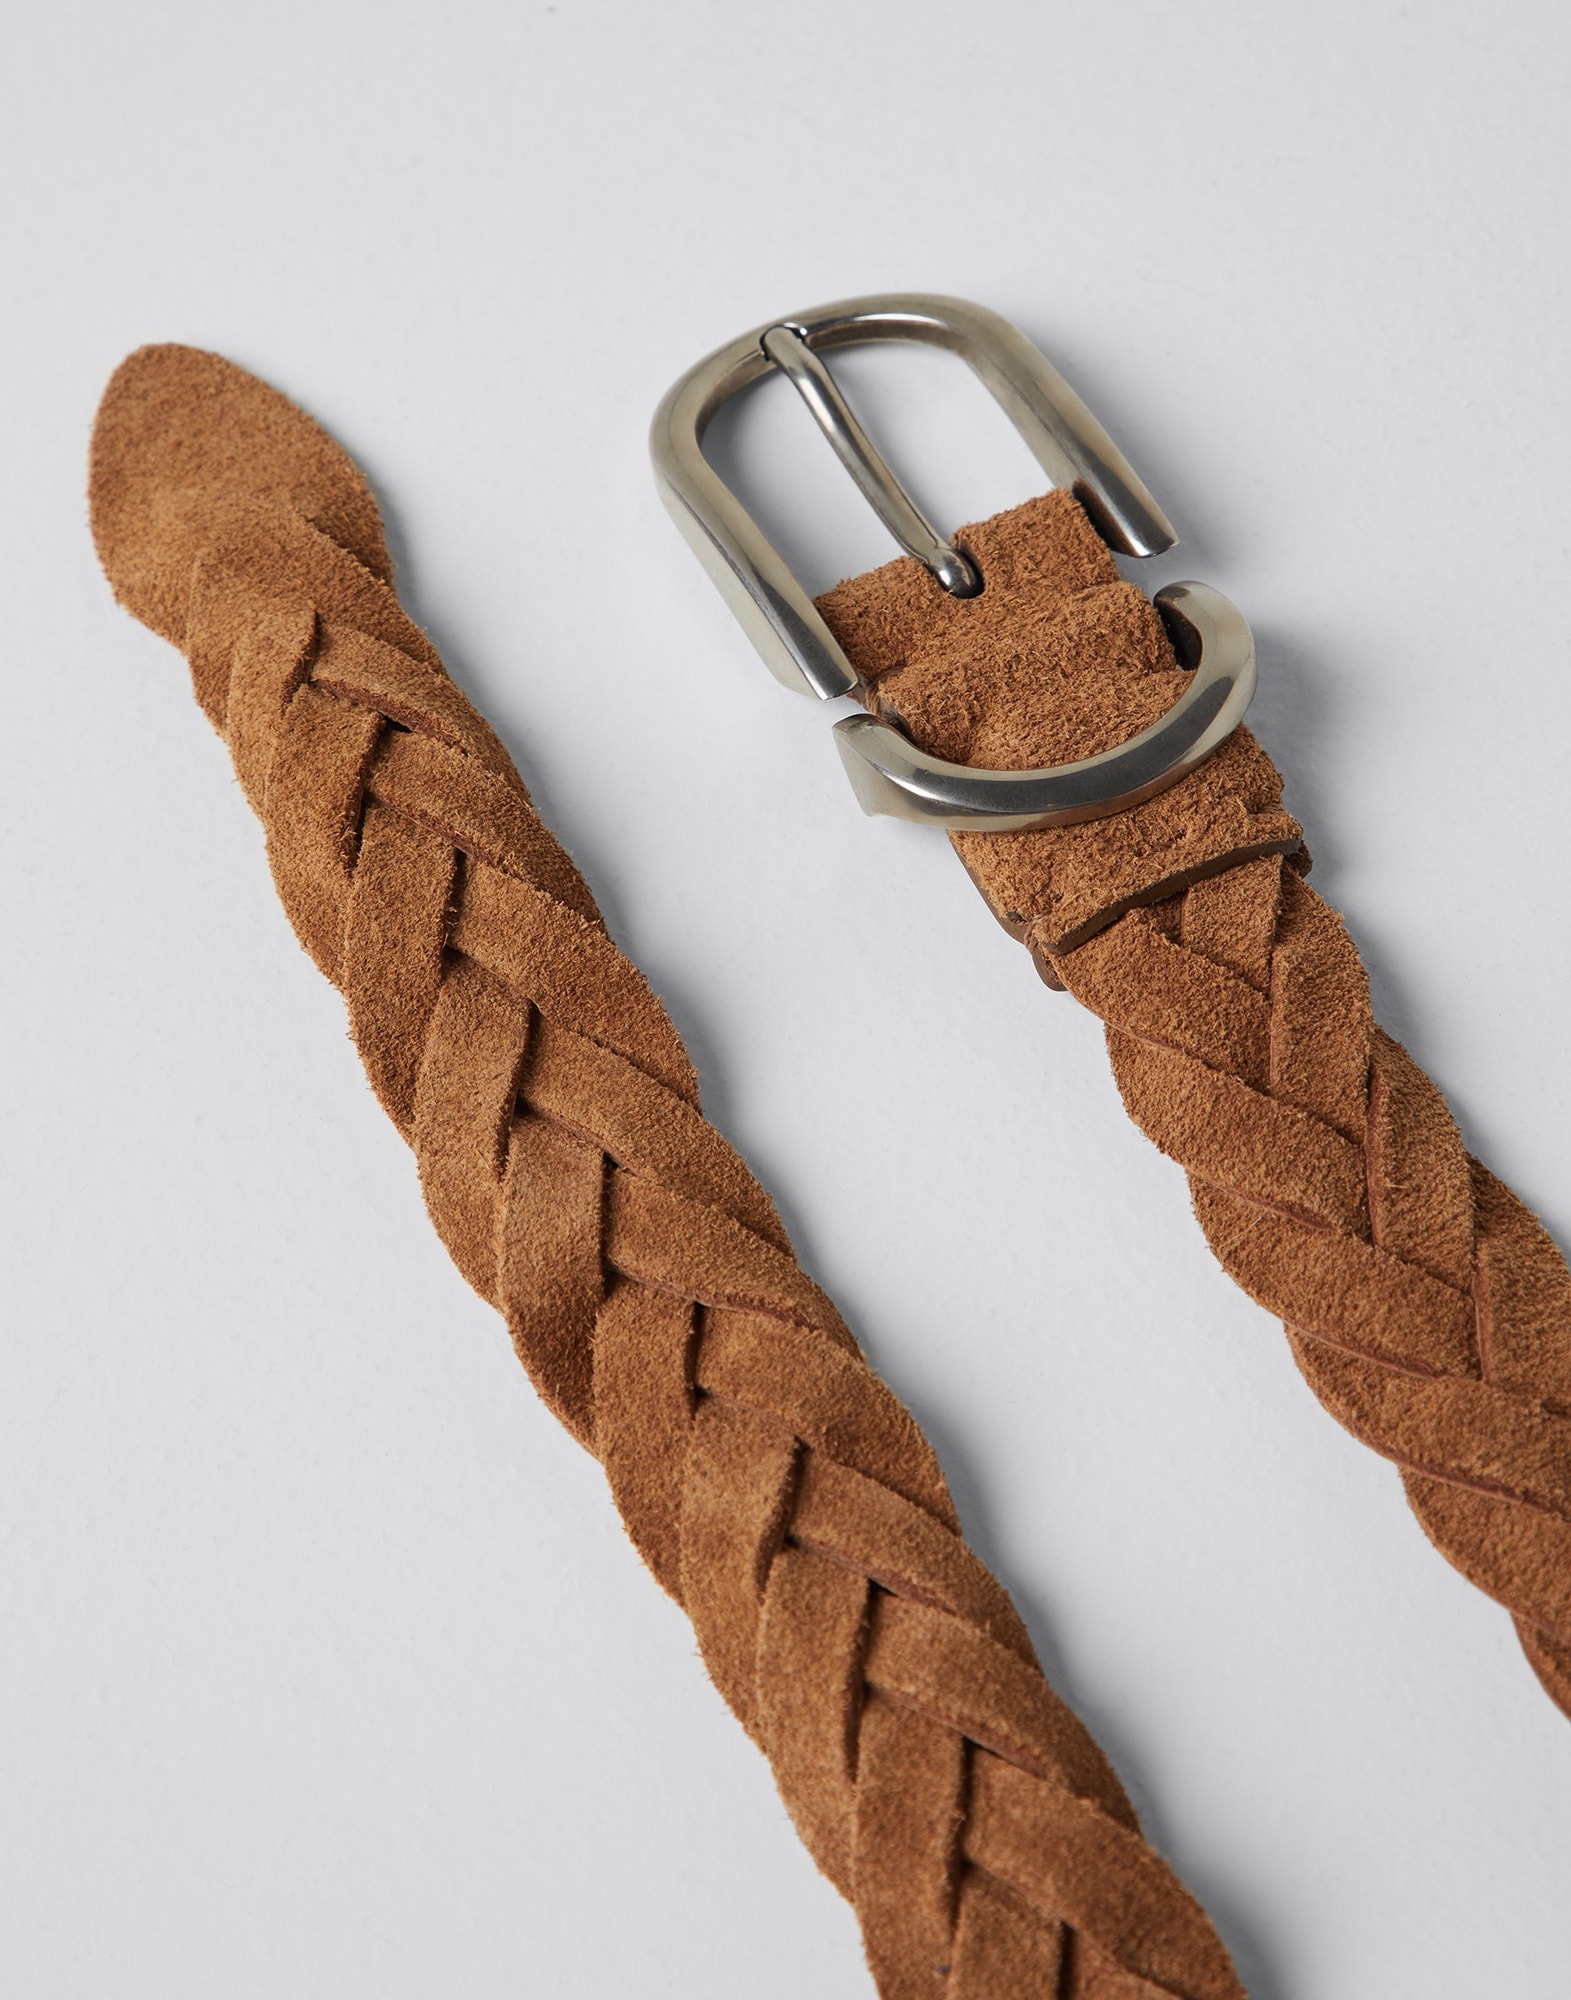 Bull suede braided belt with rounded buckle and metal keeper - 2